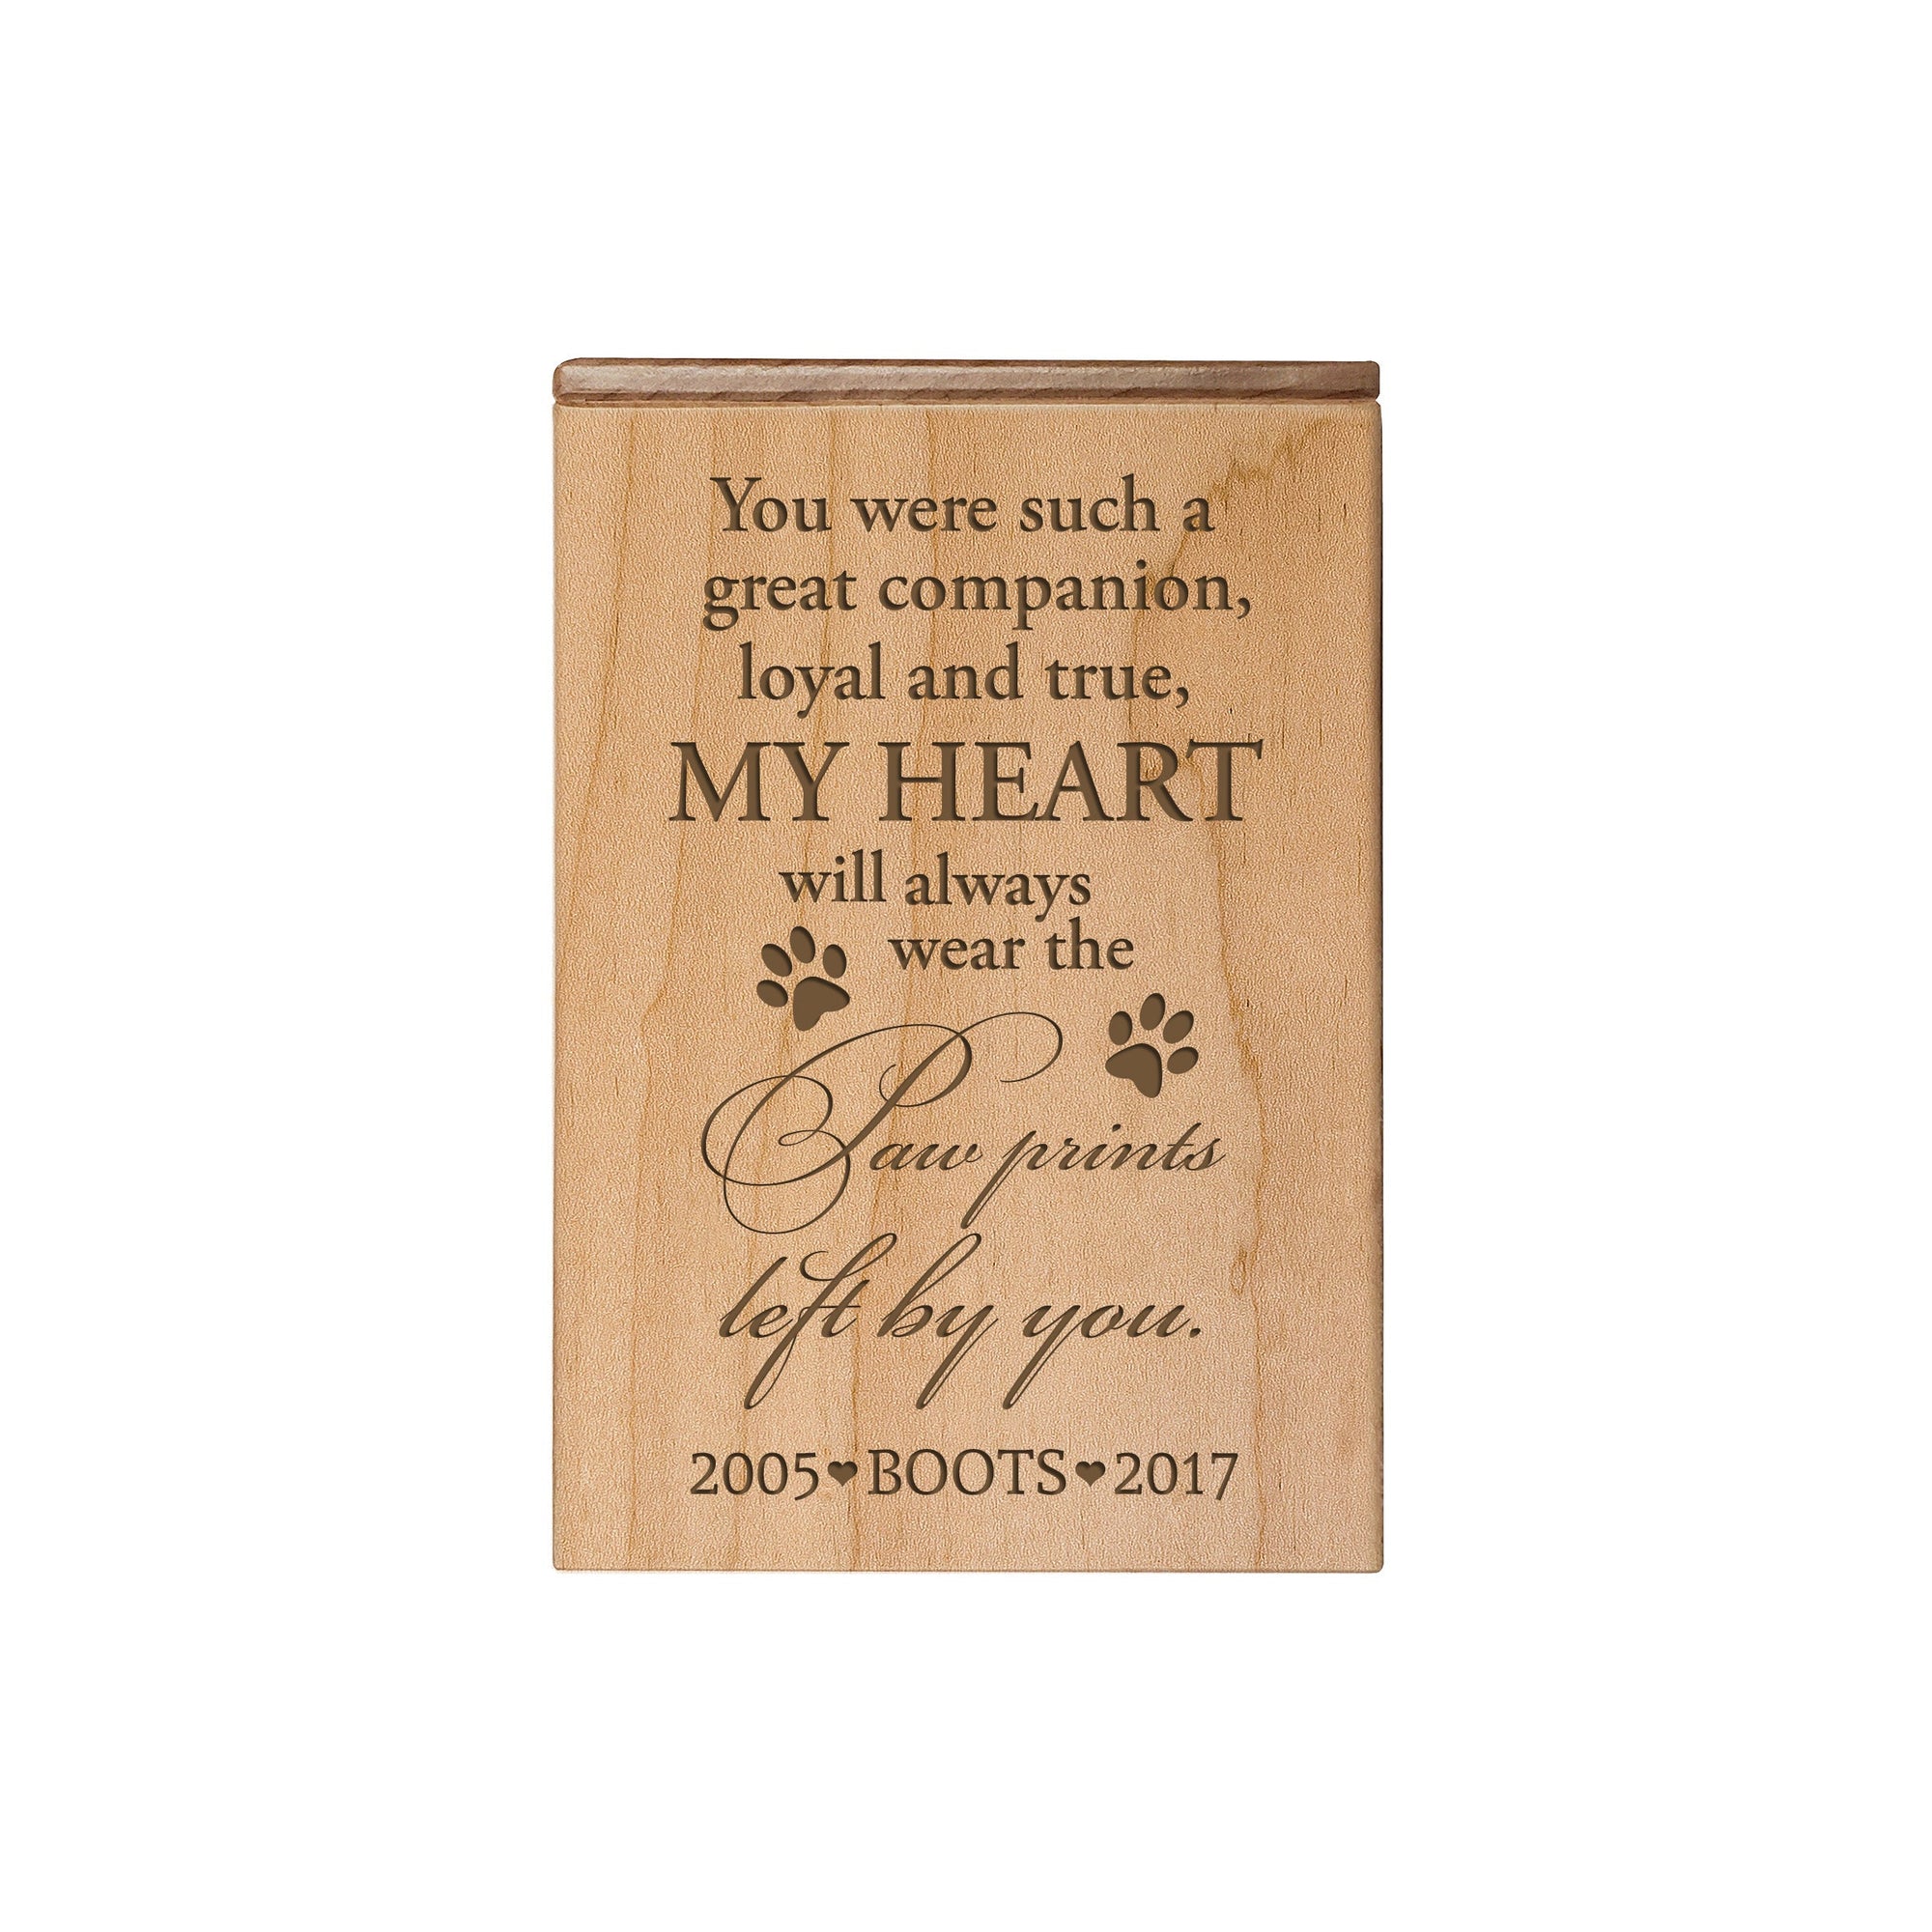 Pet Memorial Keepsake Cremation Urn Box For Dog or Cat - You Were Such A Great Companion